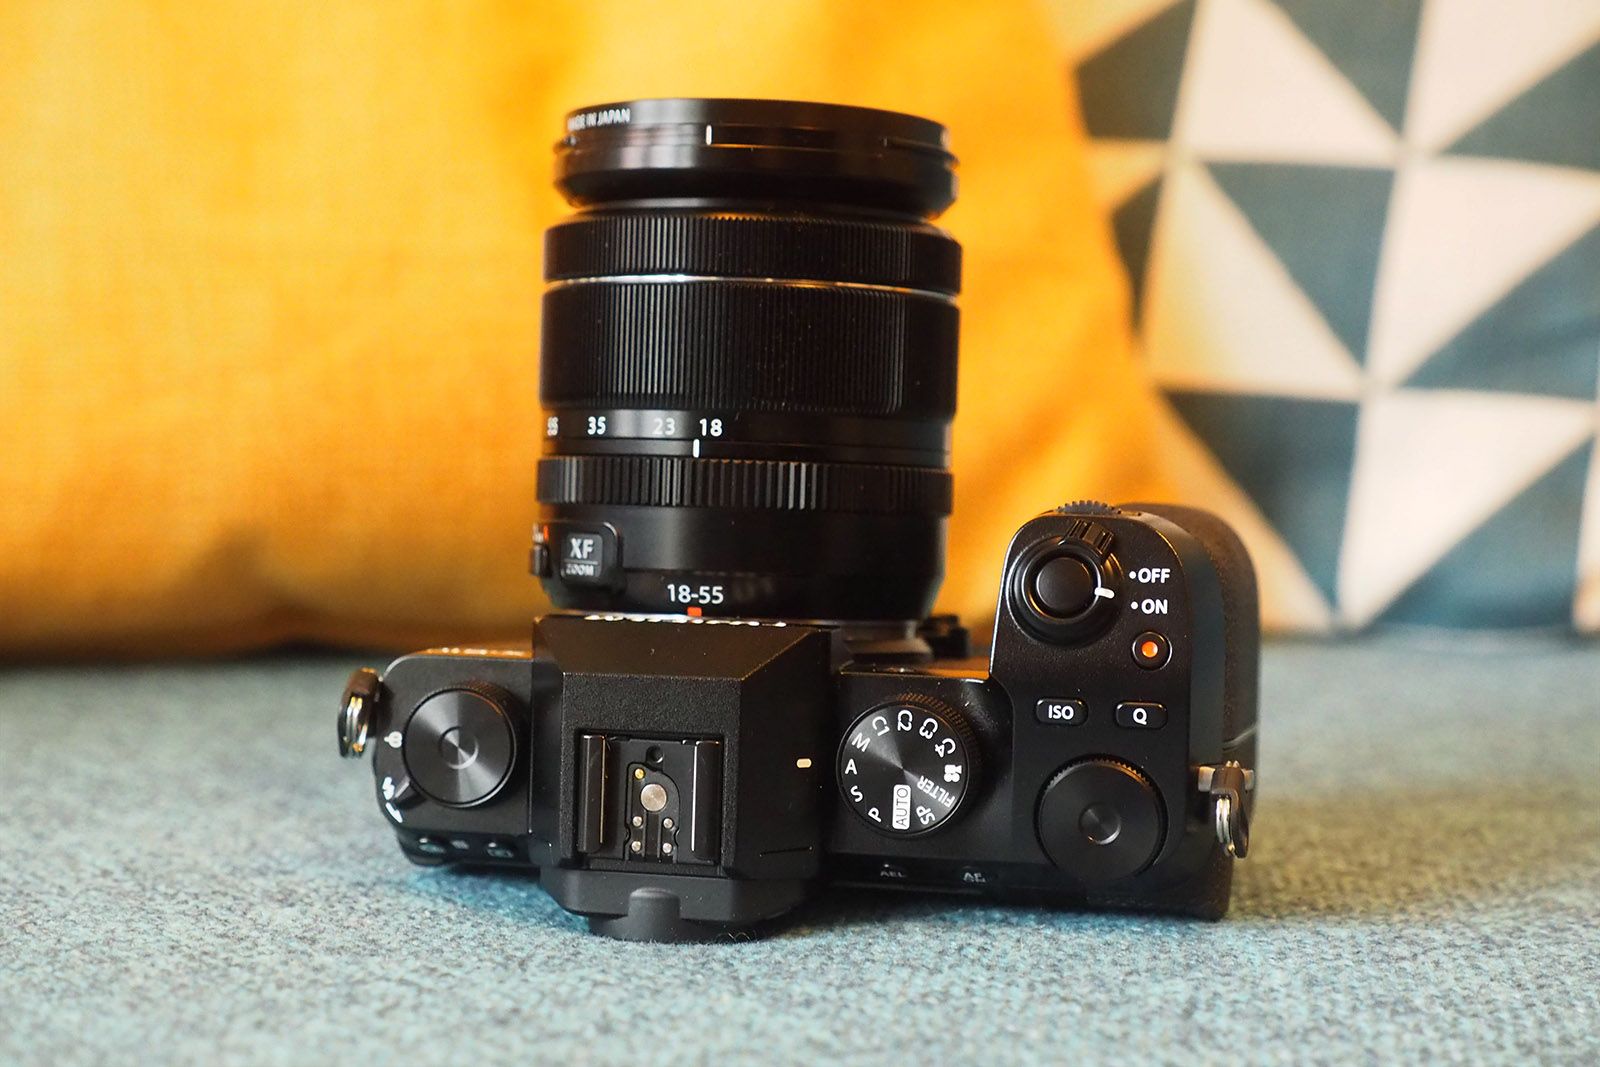 What to look for in a mirrorless camera? We highlight why the X-S10 is a great option photo 3